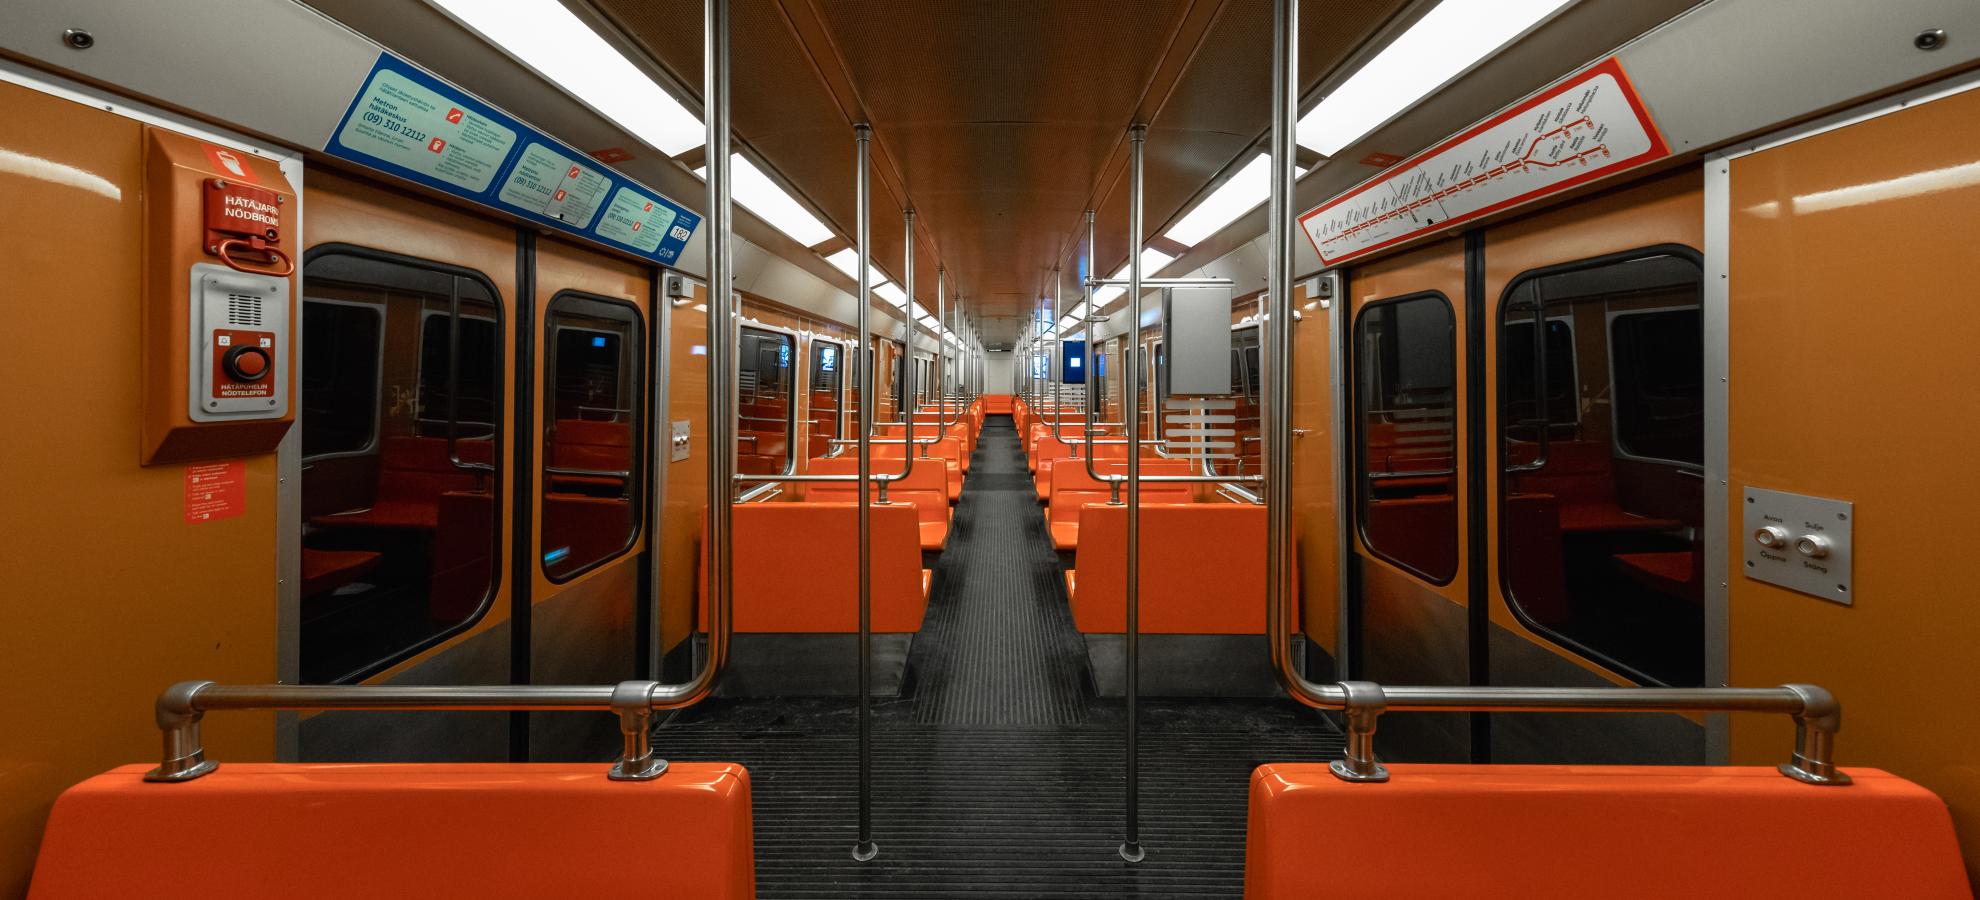 A view down the long carriage of an 80s metro train, bright orange bench seats line either side with the walls a more subdued shade of orange, florescent strip lights also running the length of the roof either side.